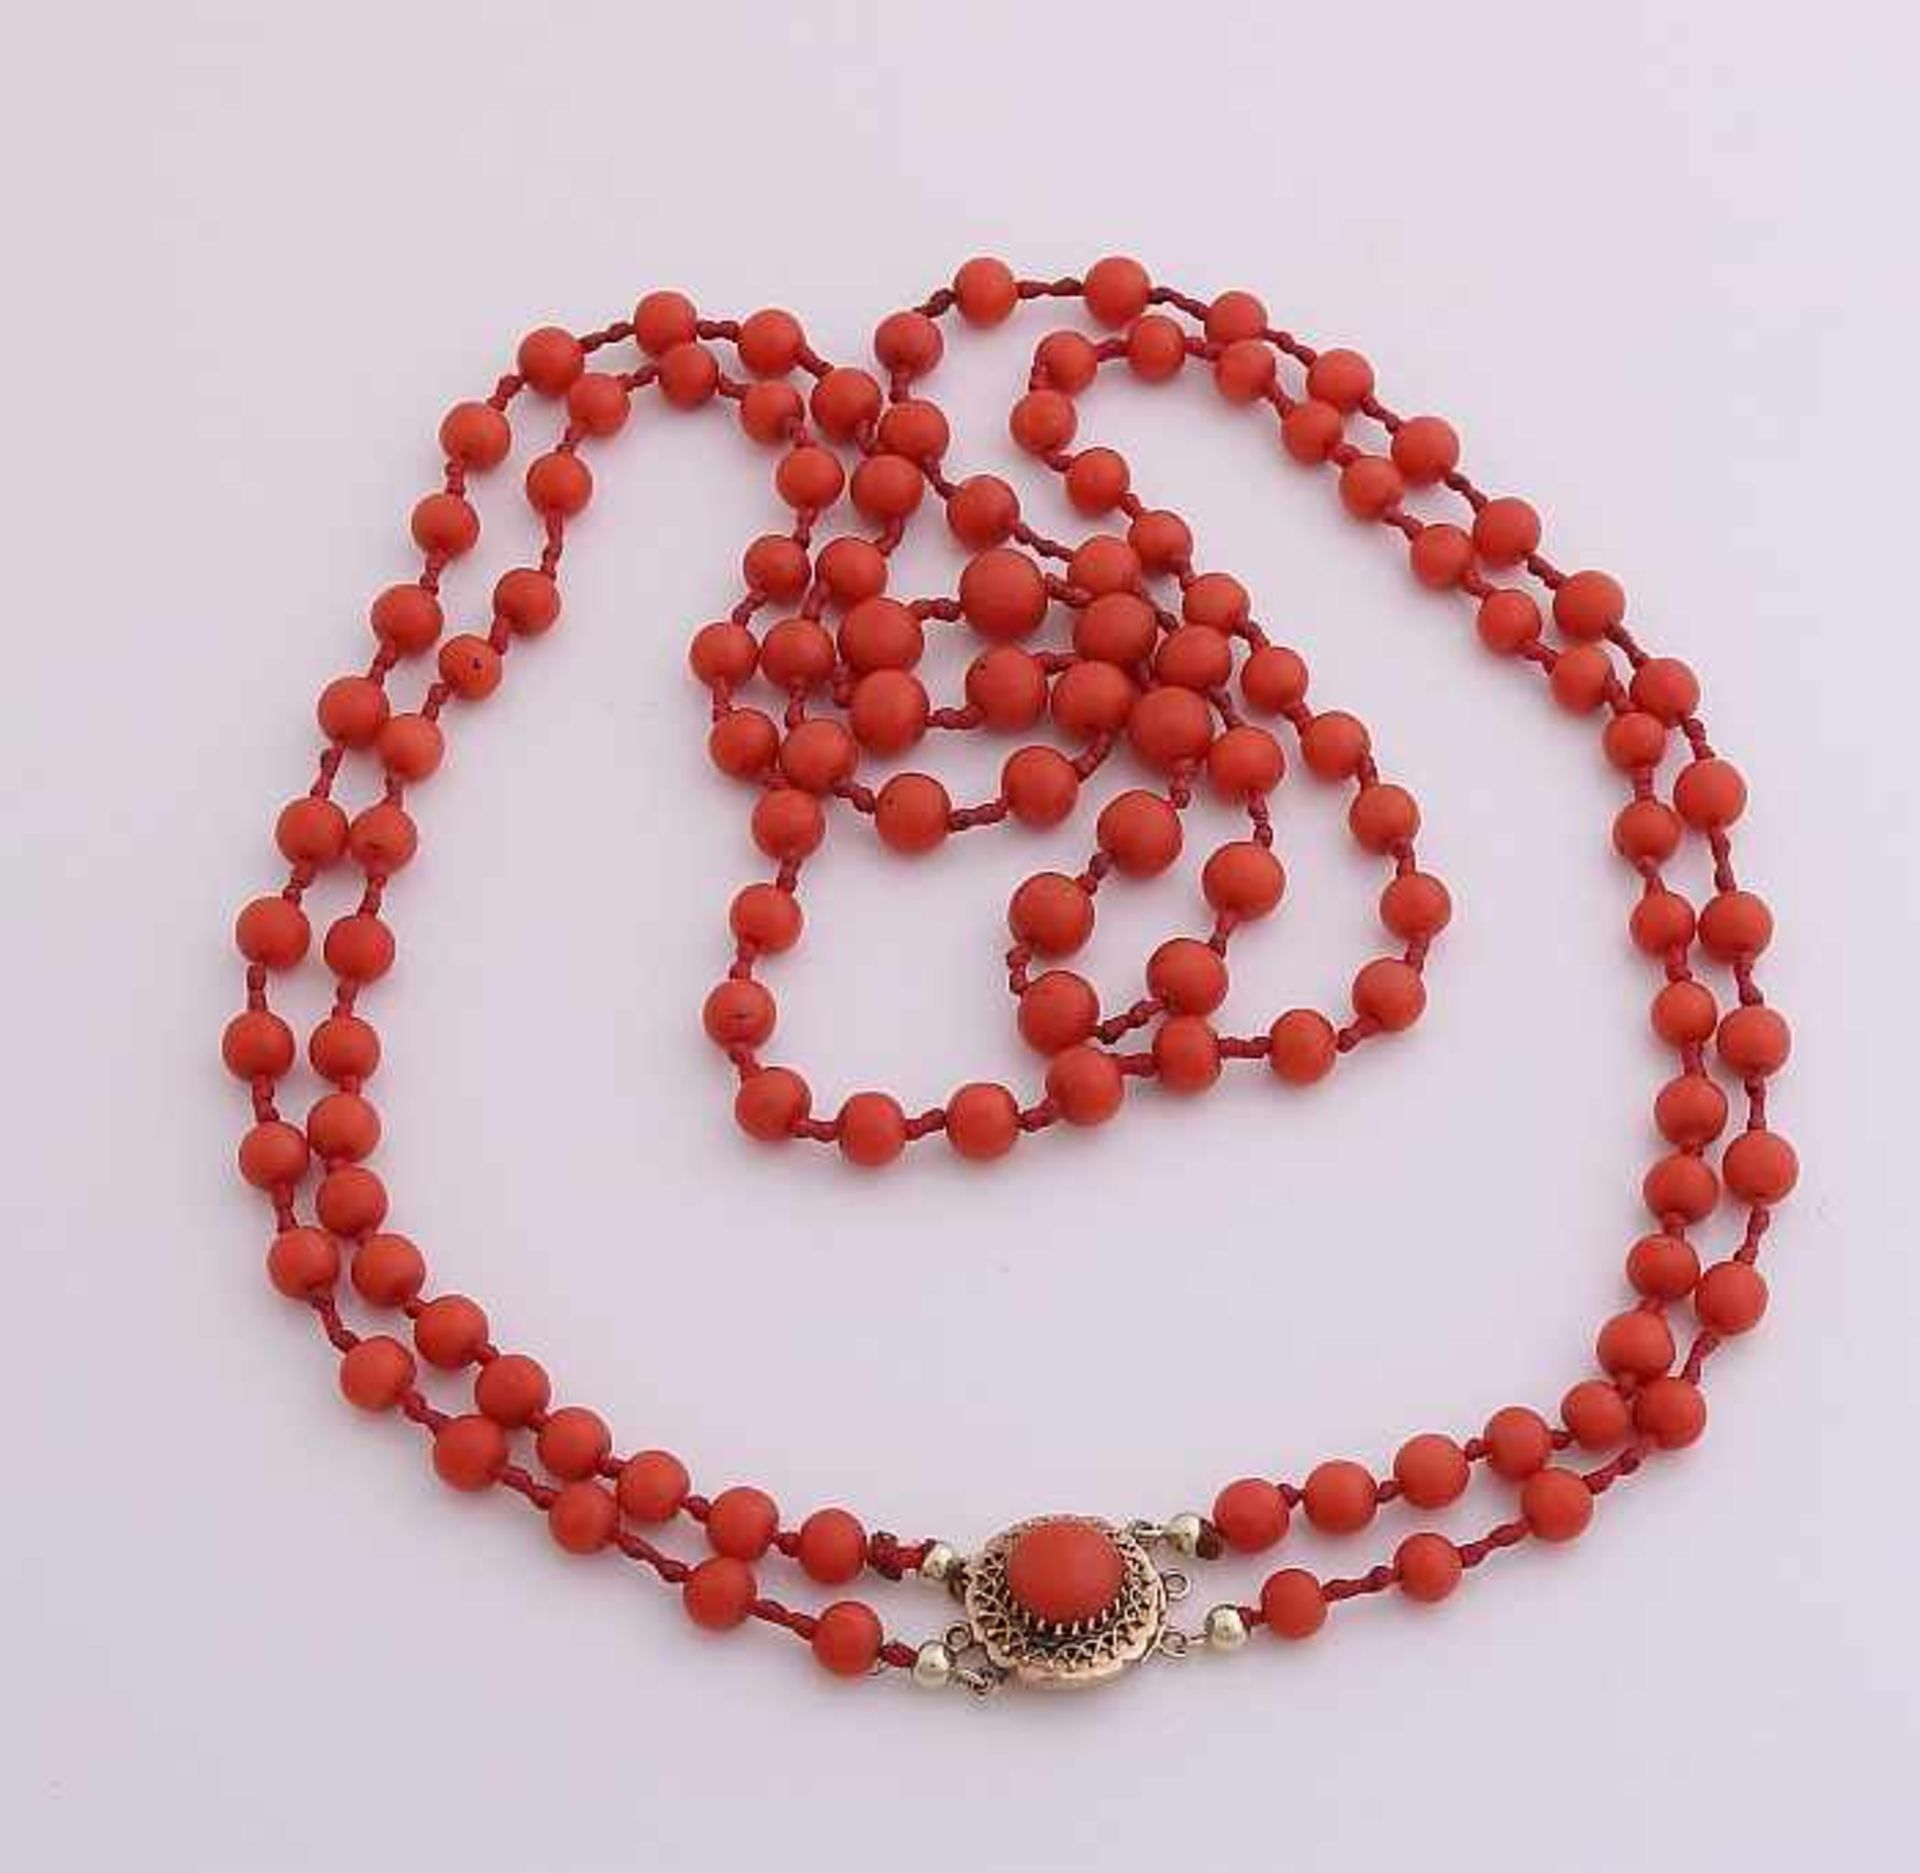 Necklace of coral with gold clasp, 585/000. Over knotted necklace of coral, extending 6-8mm in size,